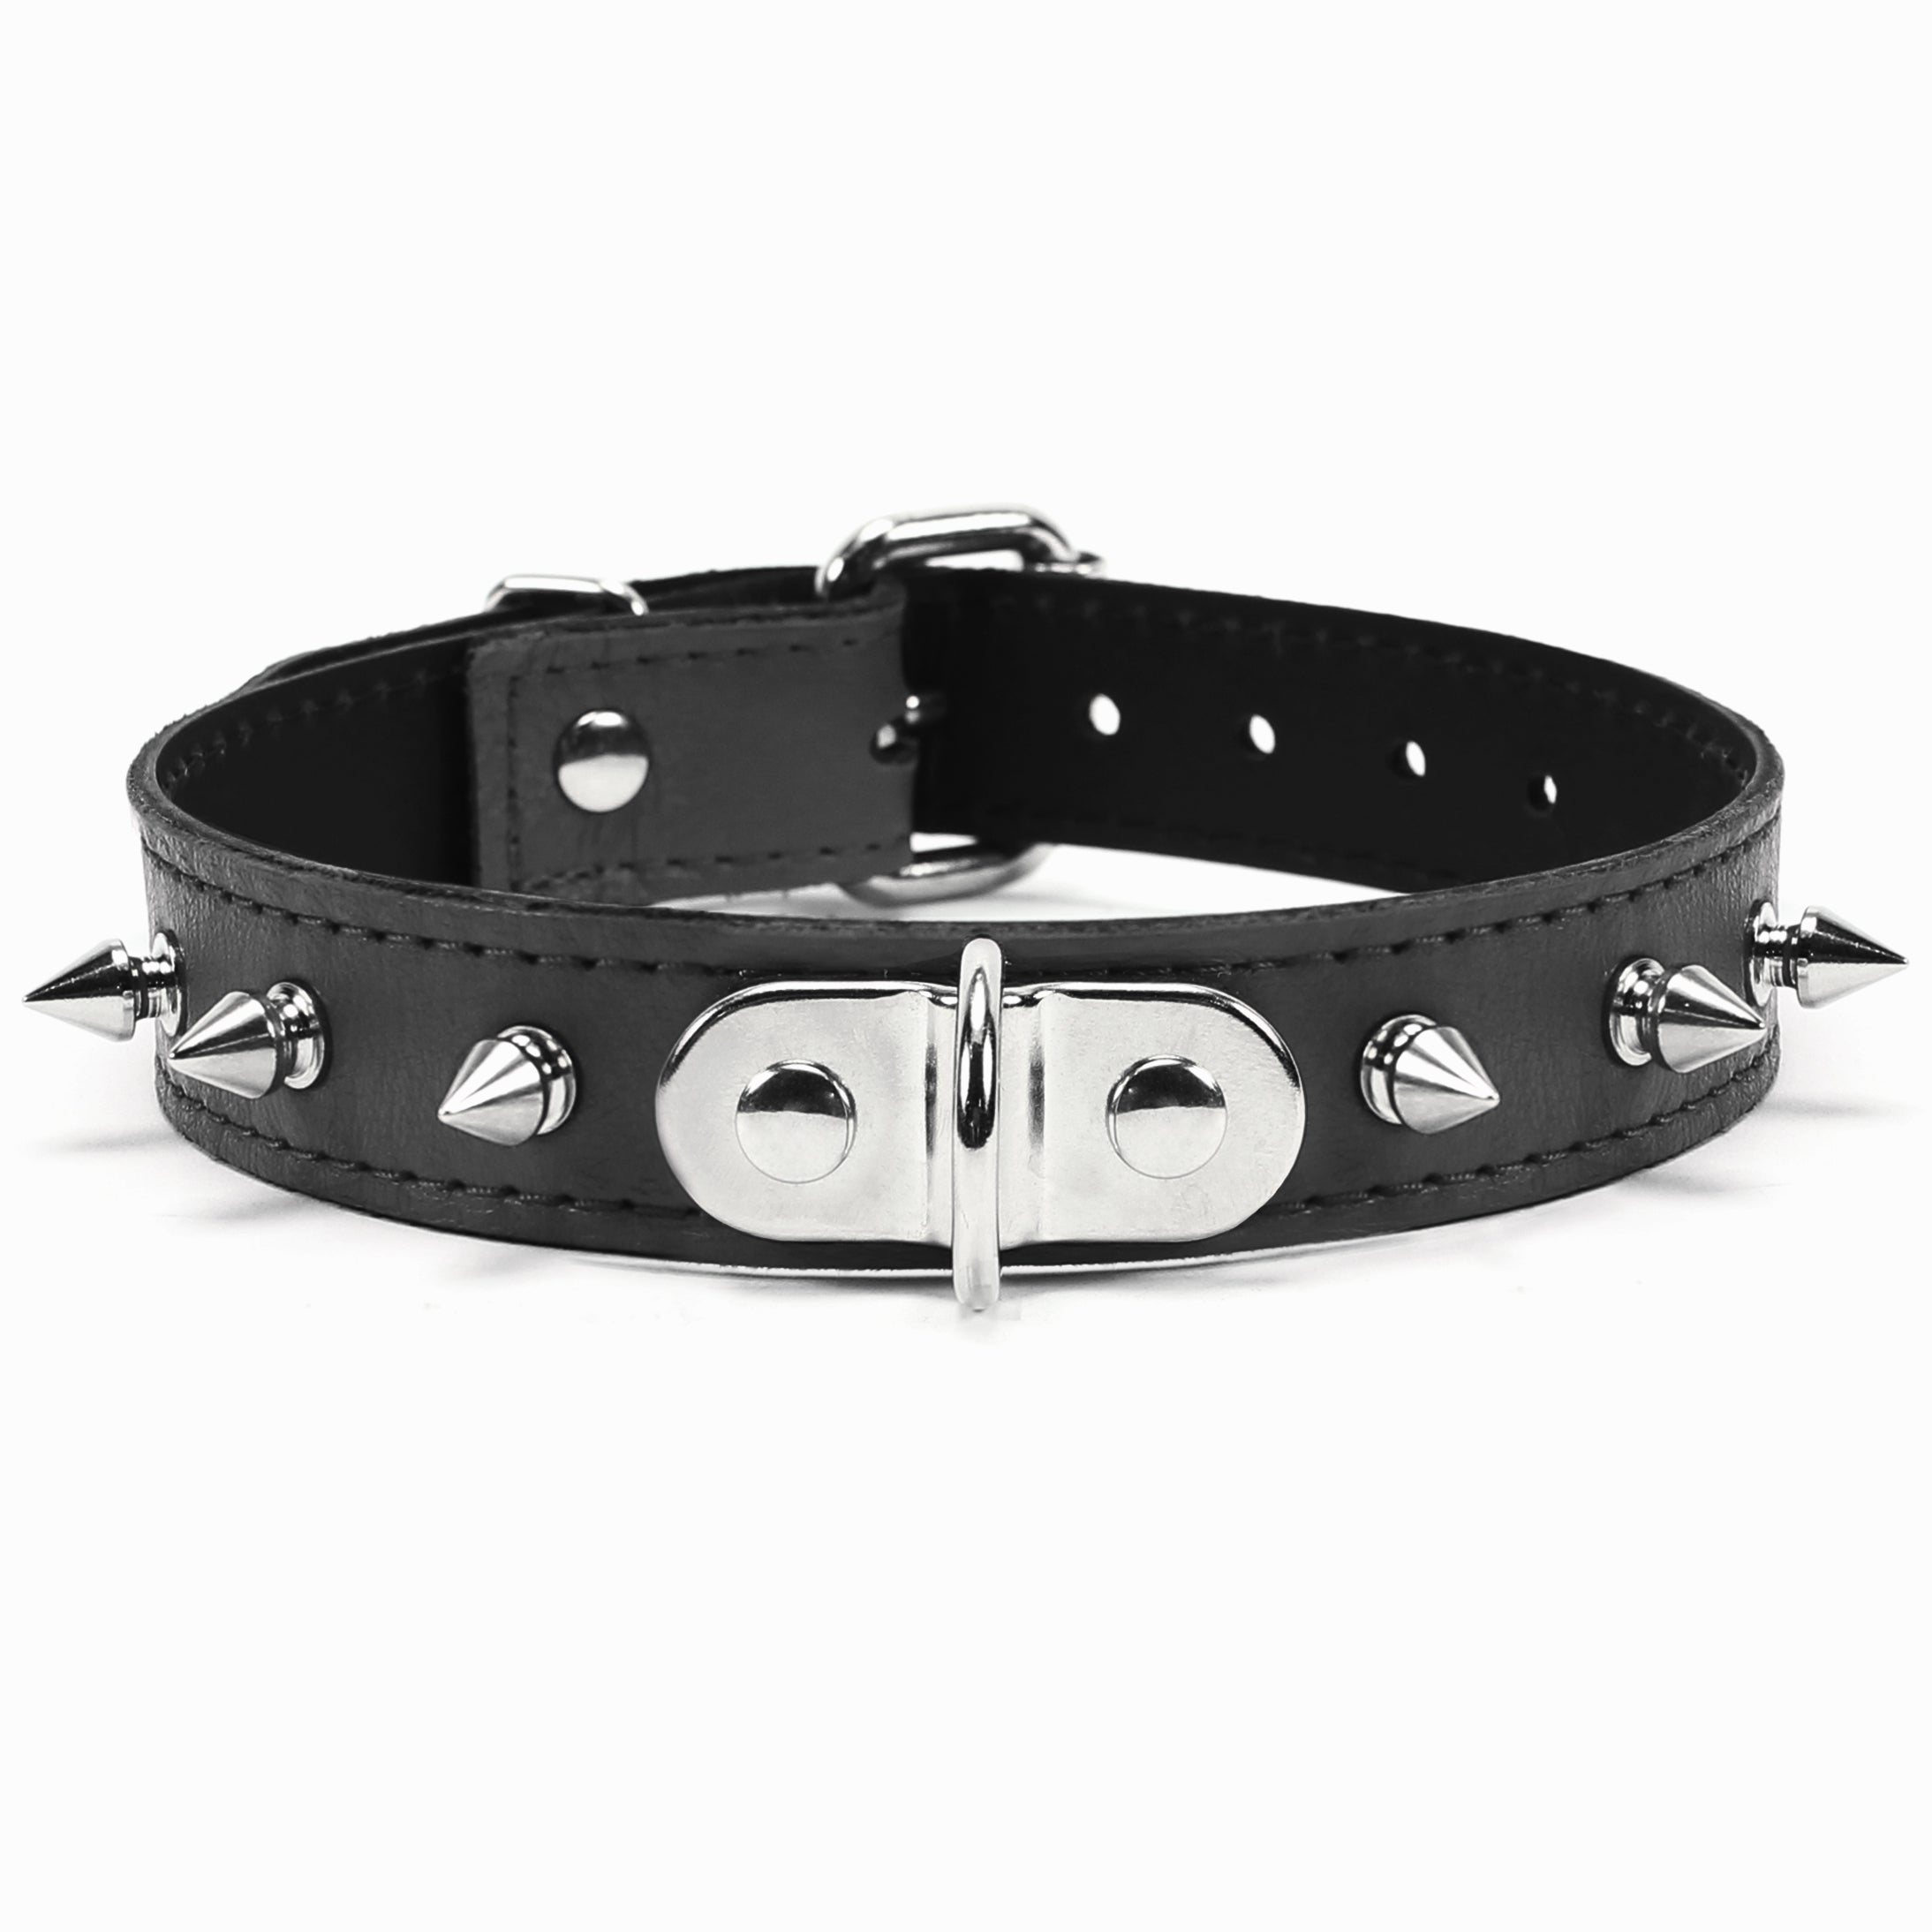 BDSM leather spiked collar and leash for men - choker o ring and removable  chain